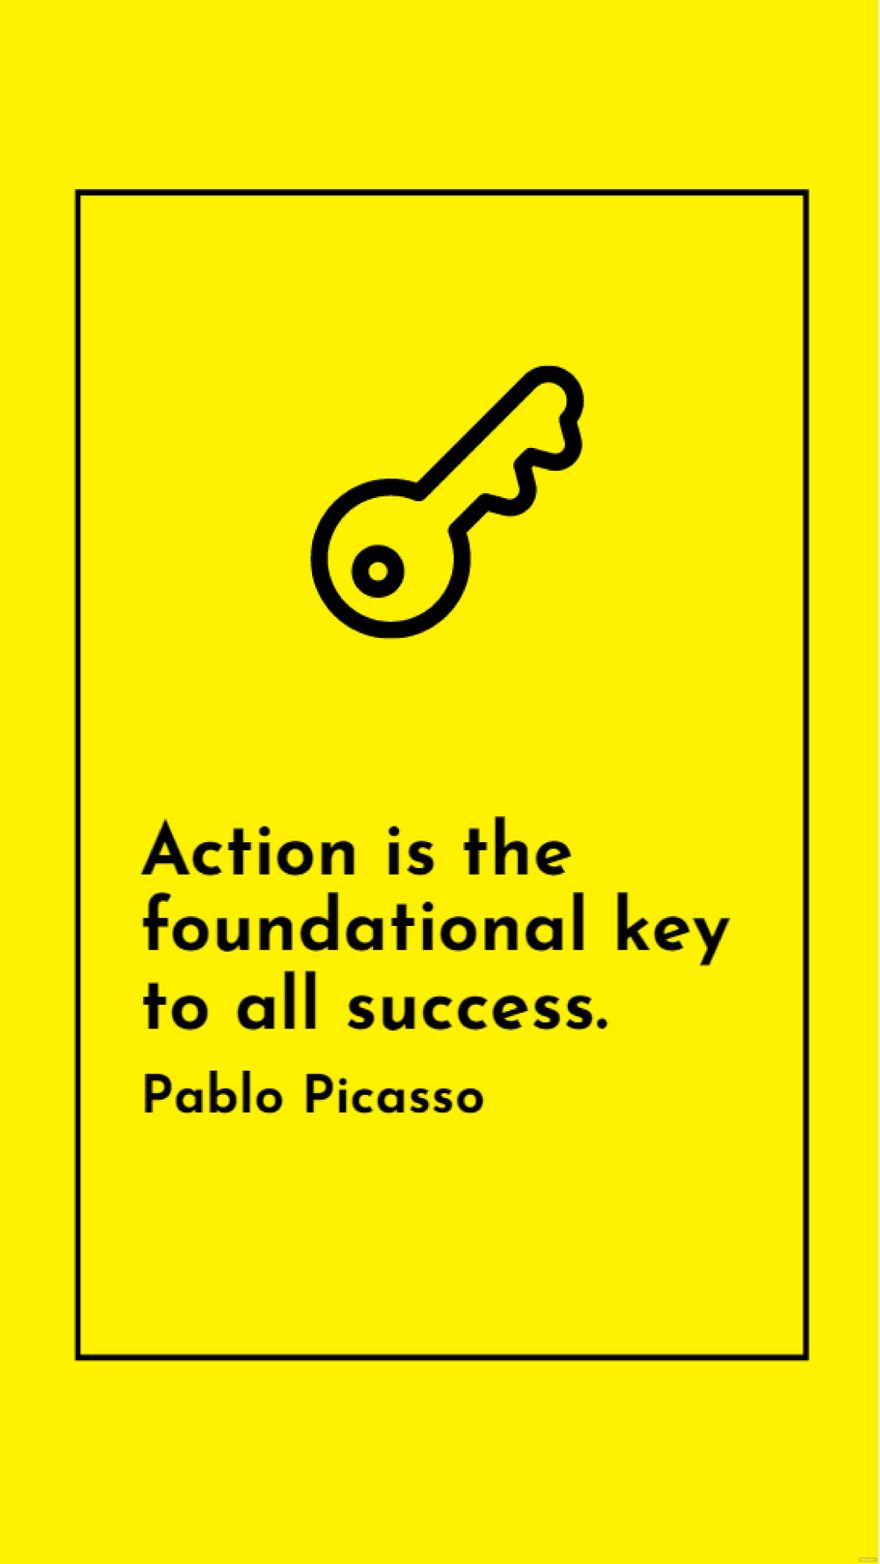 Free Pablo Picasso - Action is the foundational key to all success. in JPG